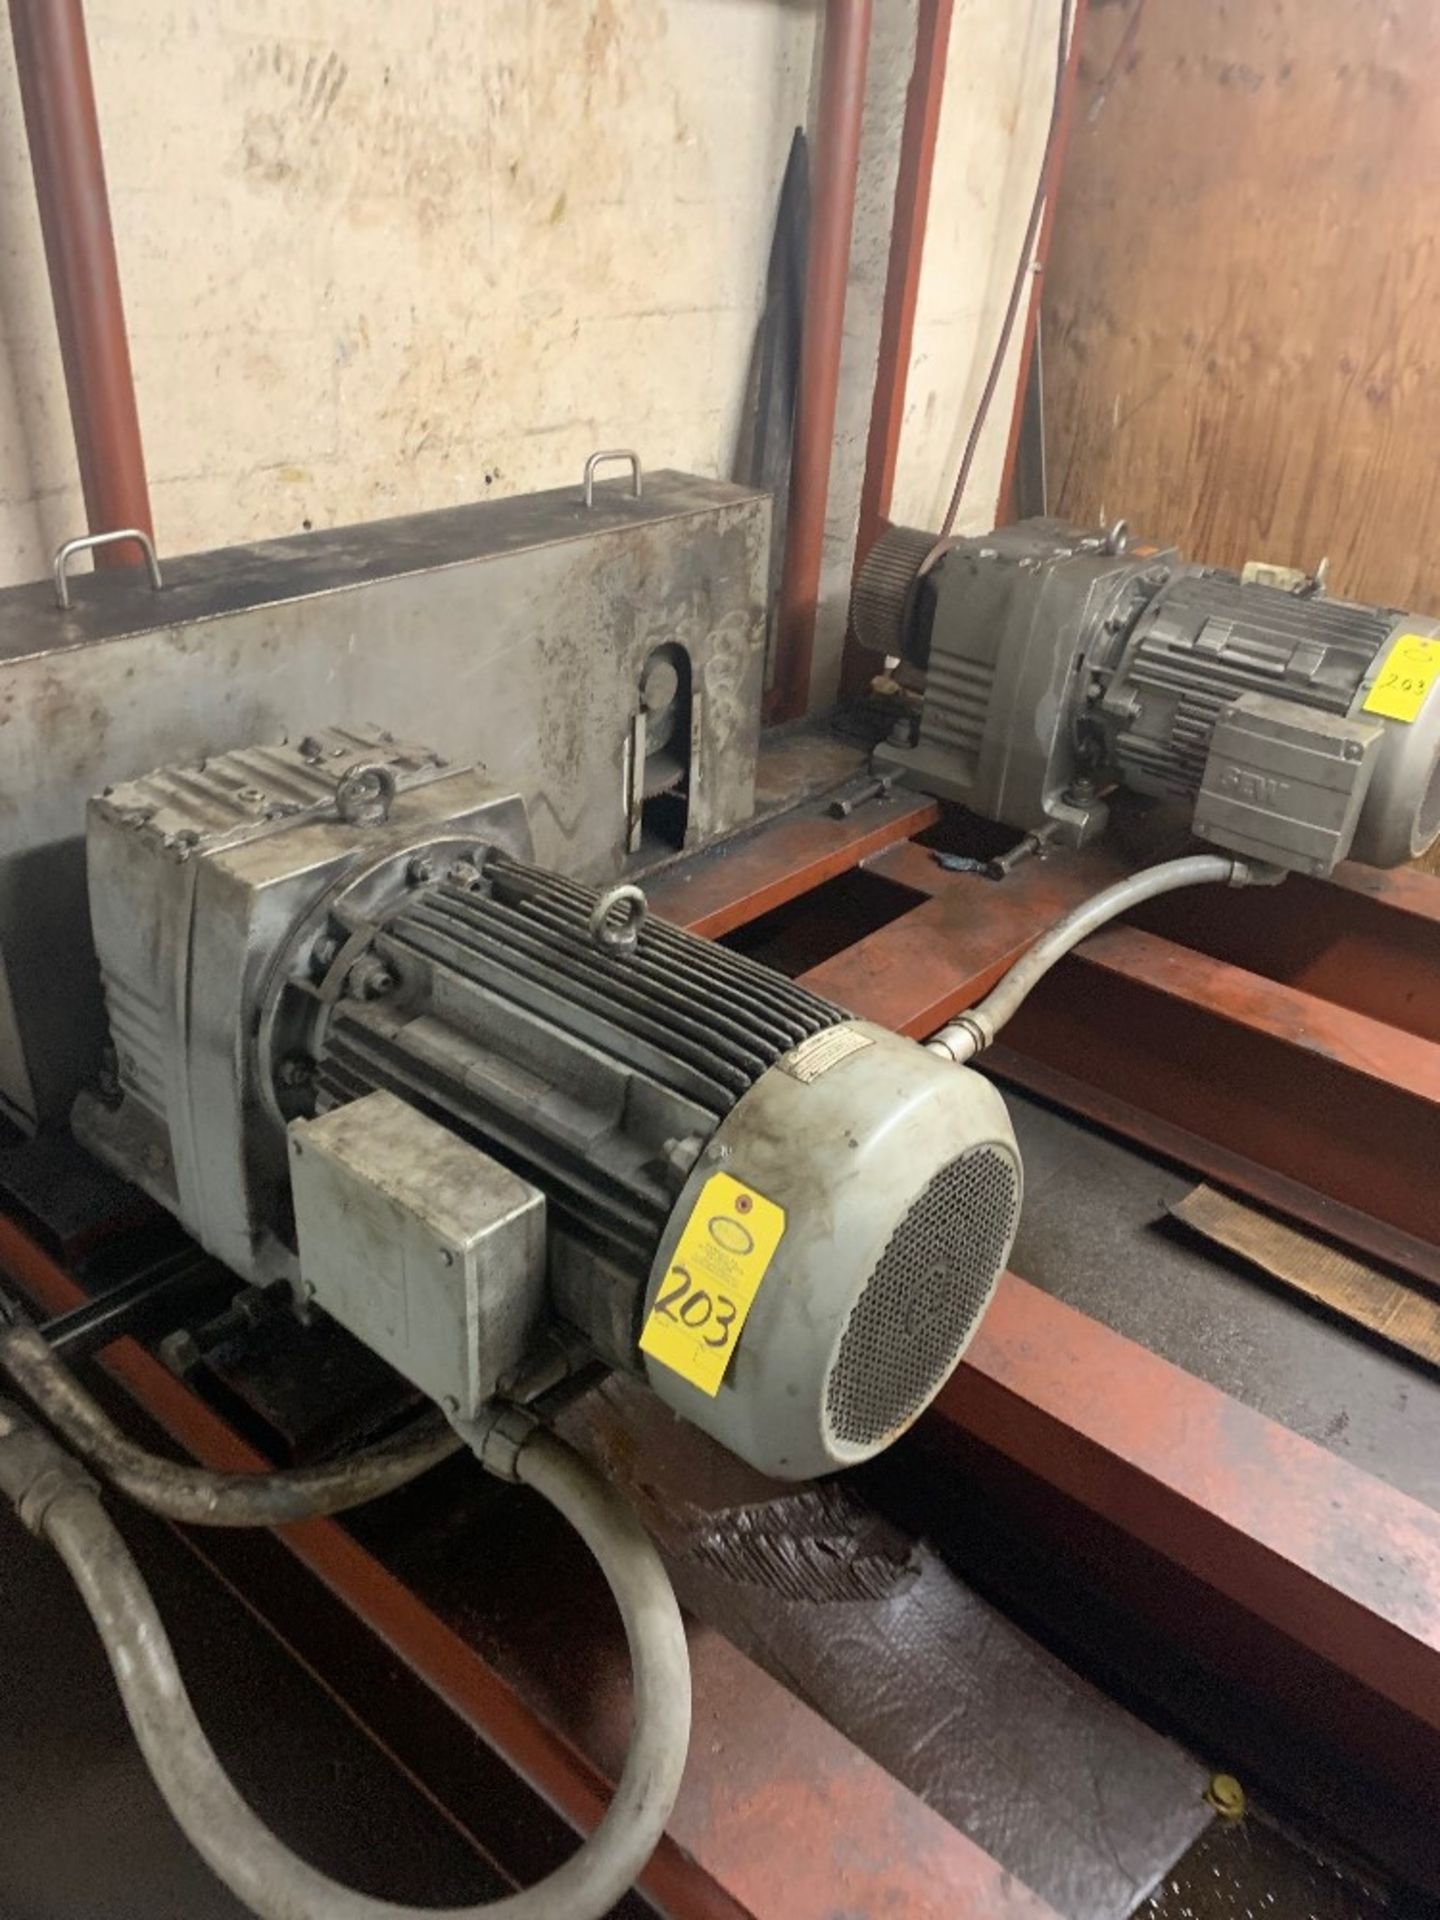 Lot of (2) SEW Gearboxes on 3 phase motors: Required Loading Fee $200.00, Rigger-Norm Pavlish,